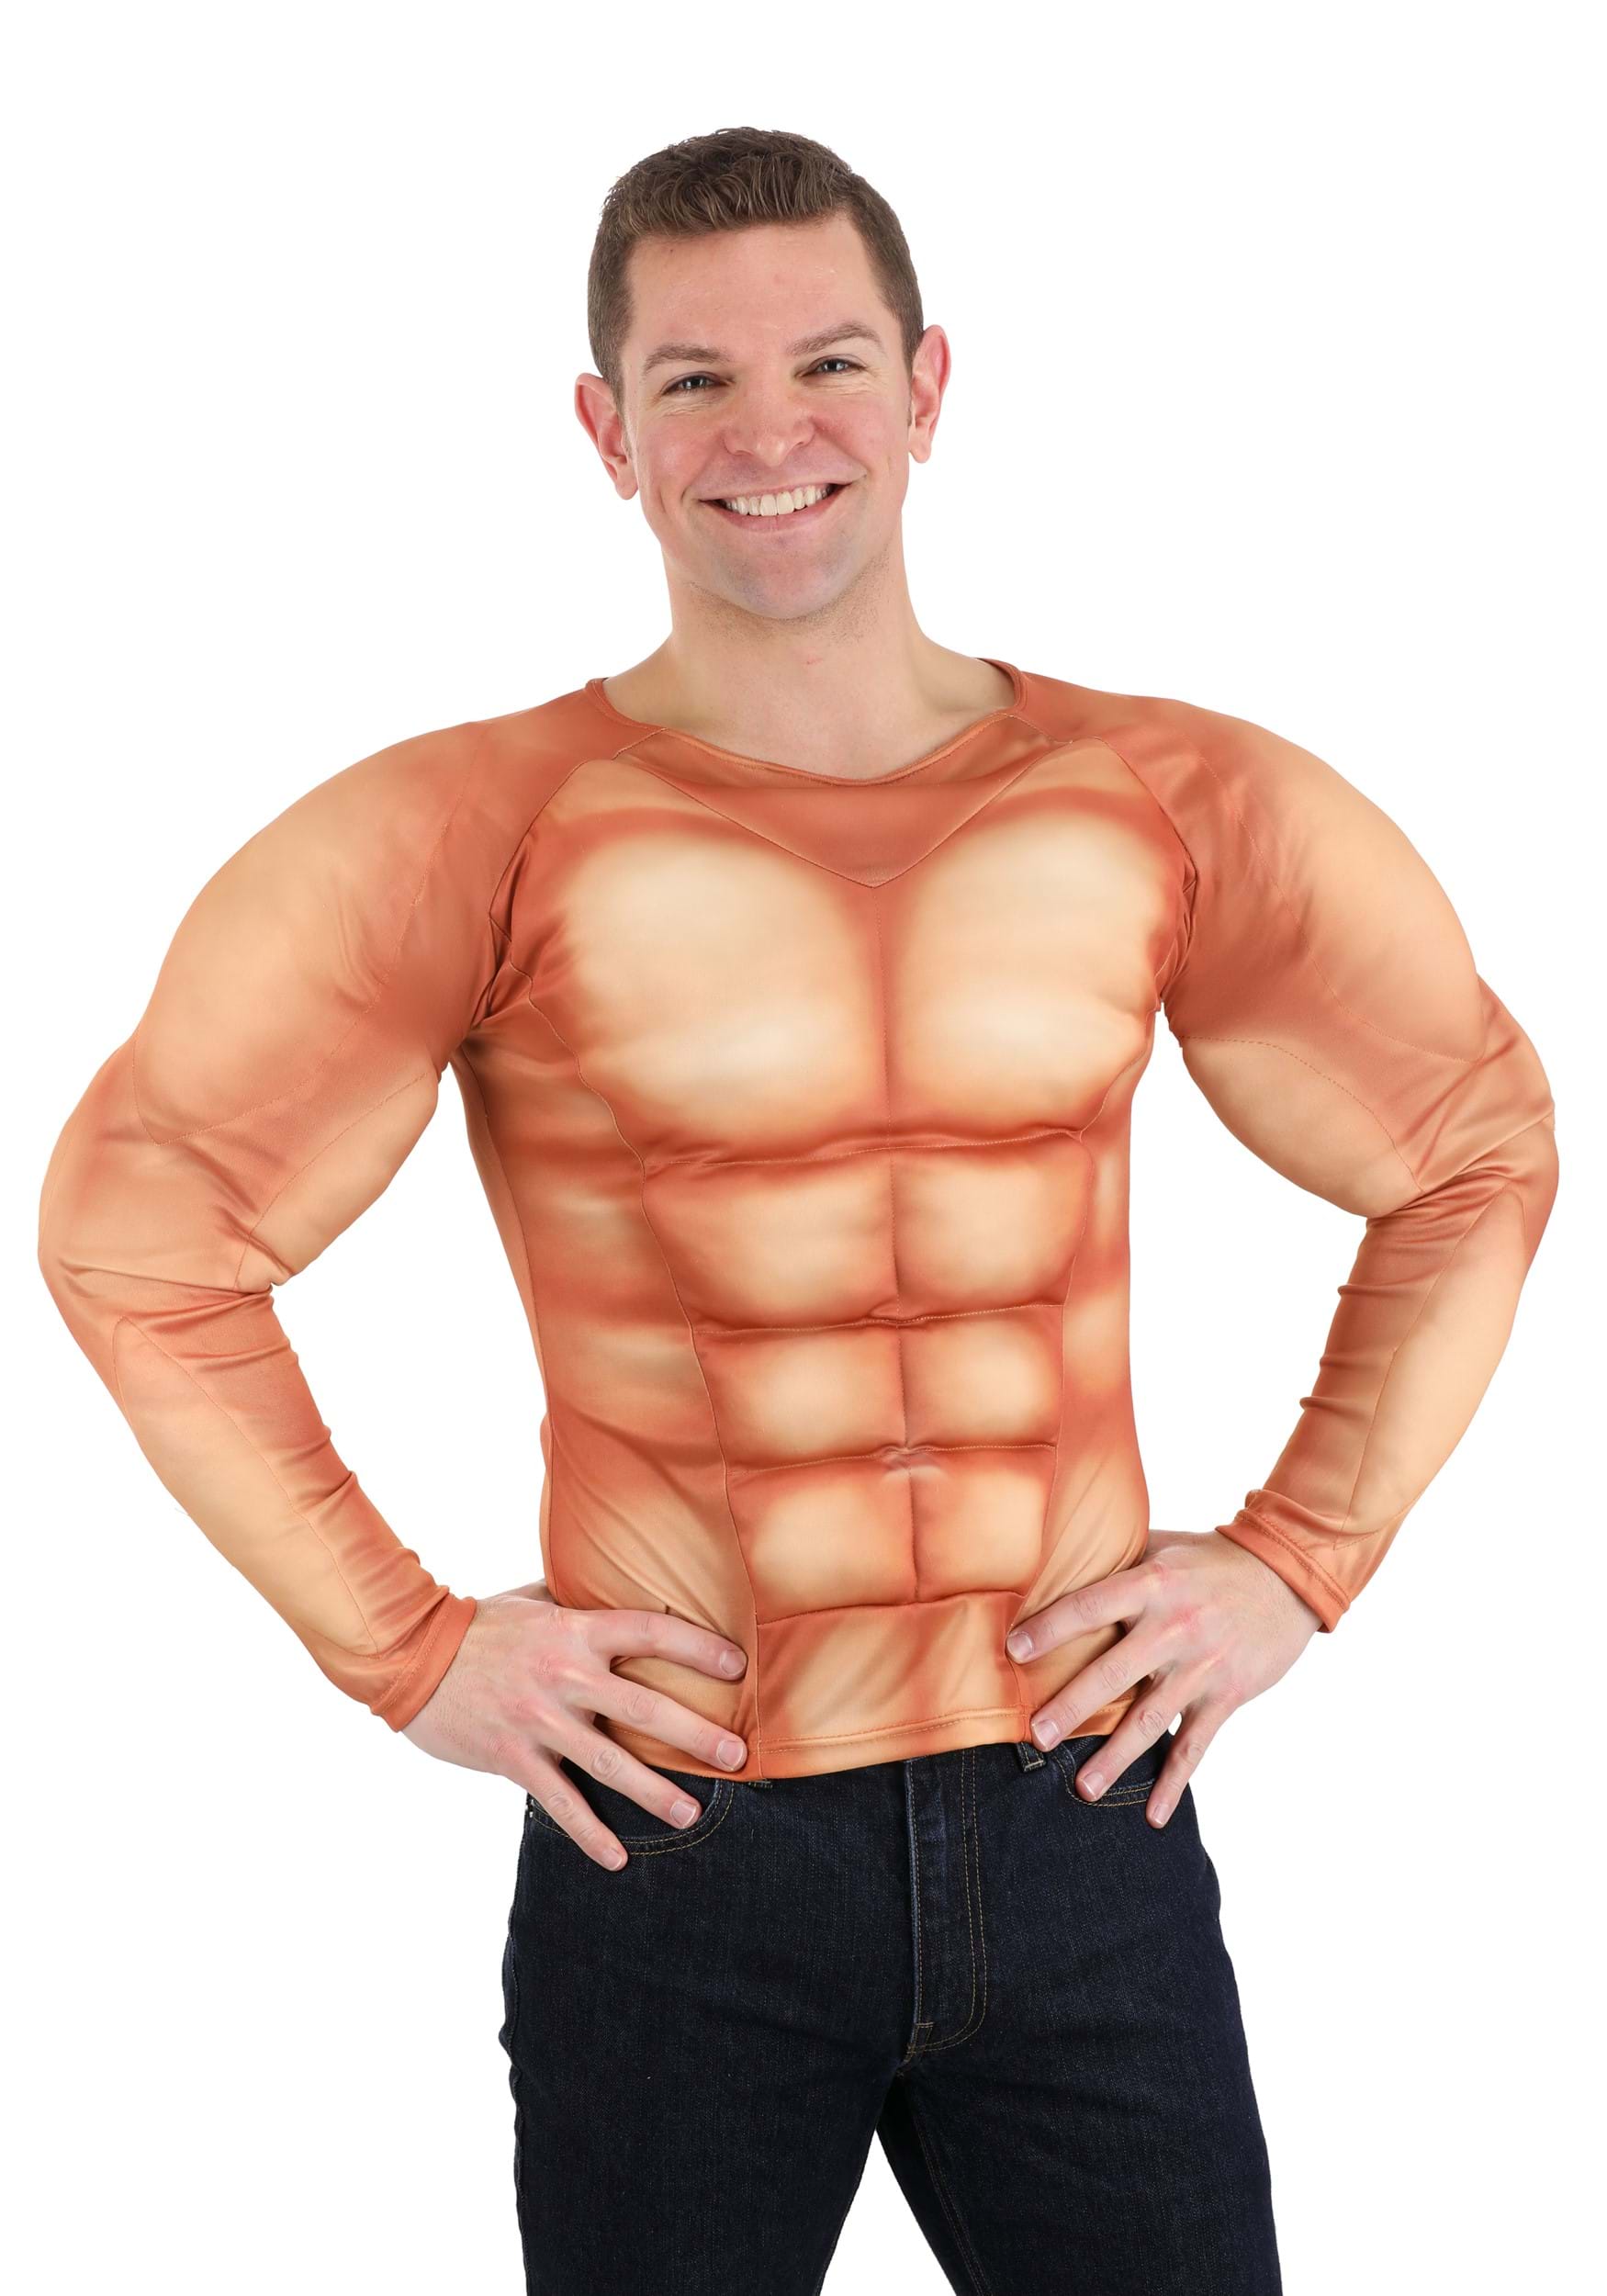 https://images.halloweencostumes.ca/products/70562/1-1/adult-padded-muscle-shirt.jpg